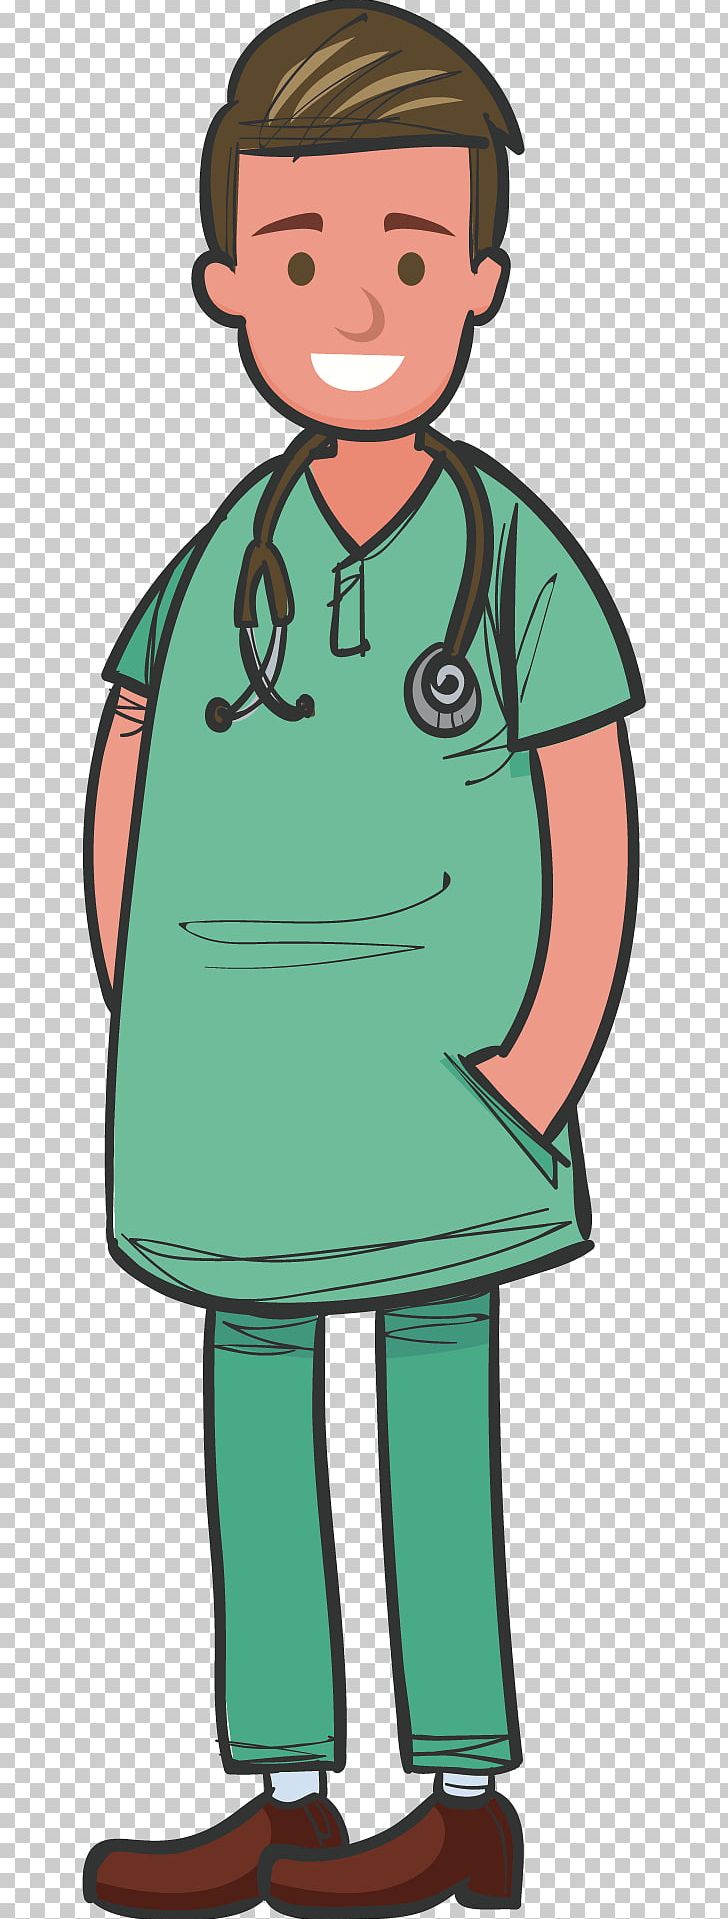 Physician Cartoon PNG, Clipart, Anime Doctor, Boy, Child, Doc, Encapsulated Postscript Free PNG Download